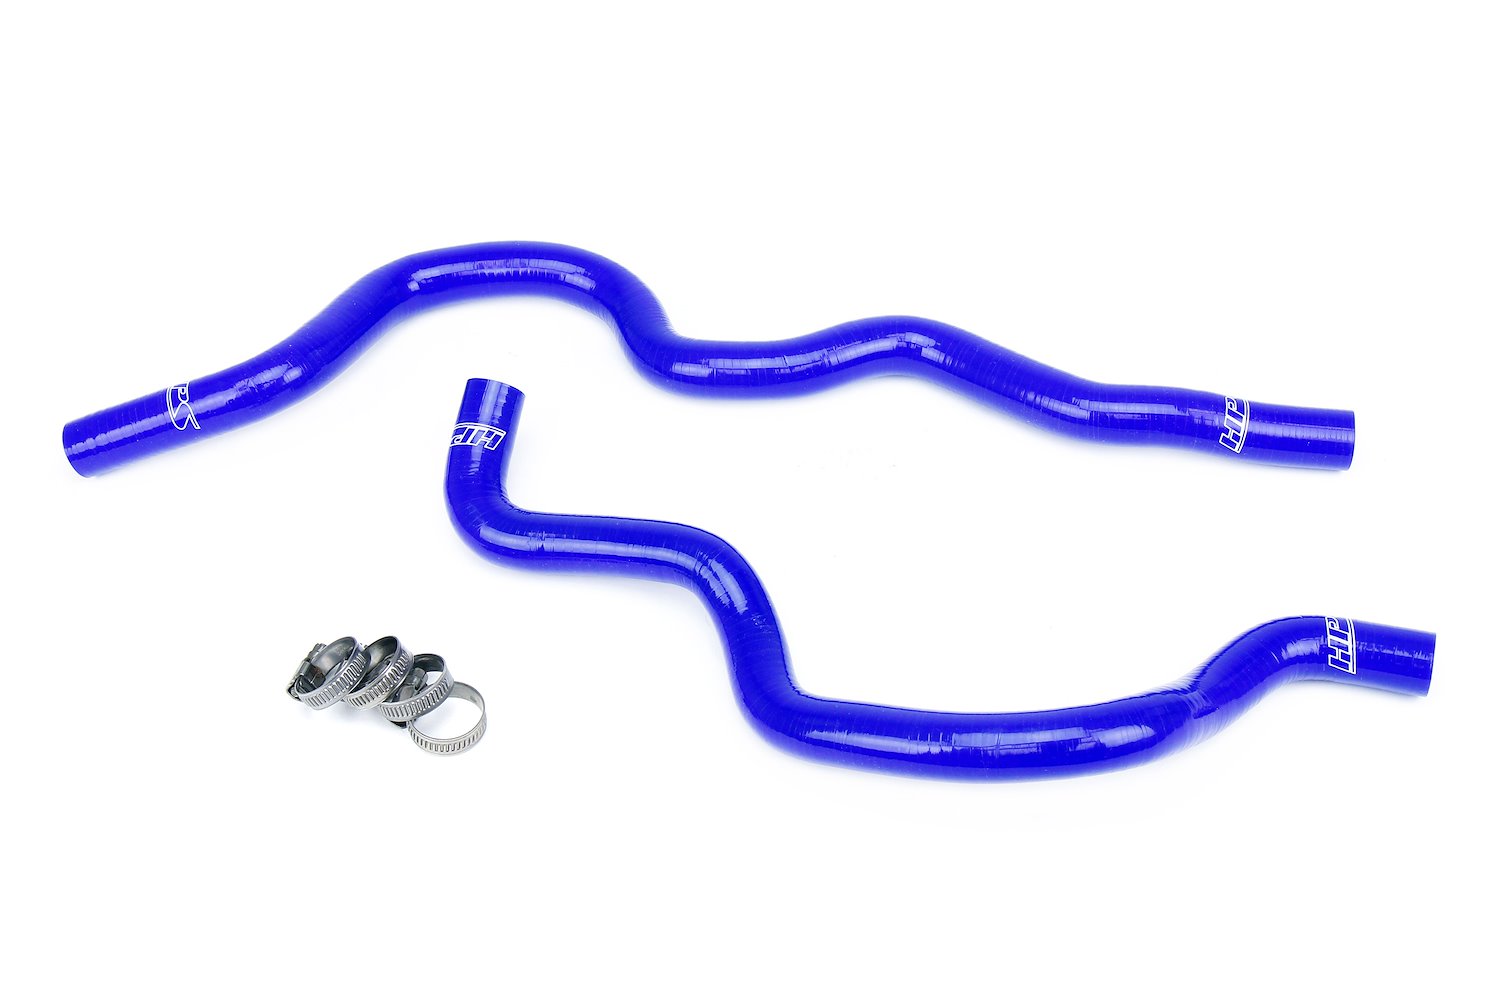 57-1872-BLUE Heater Hose Kit, 3-Ply Reinforced Silicone, Replaces Rubber Heater Coolant Hoses